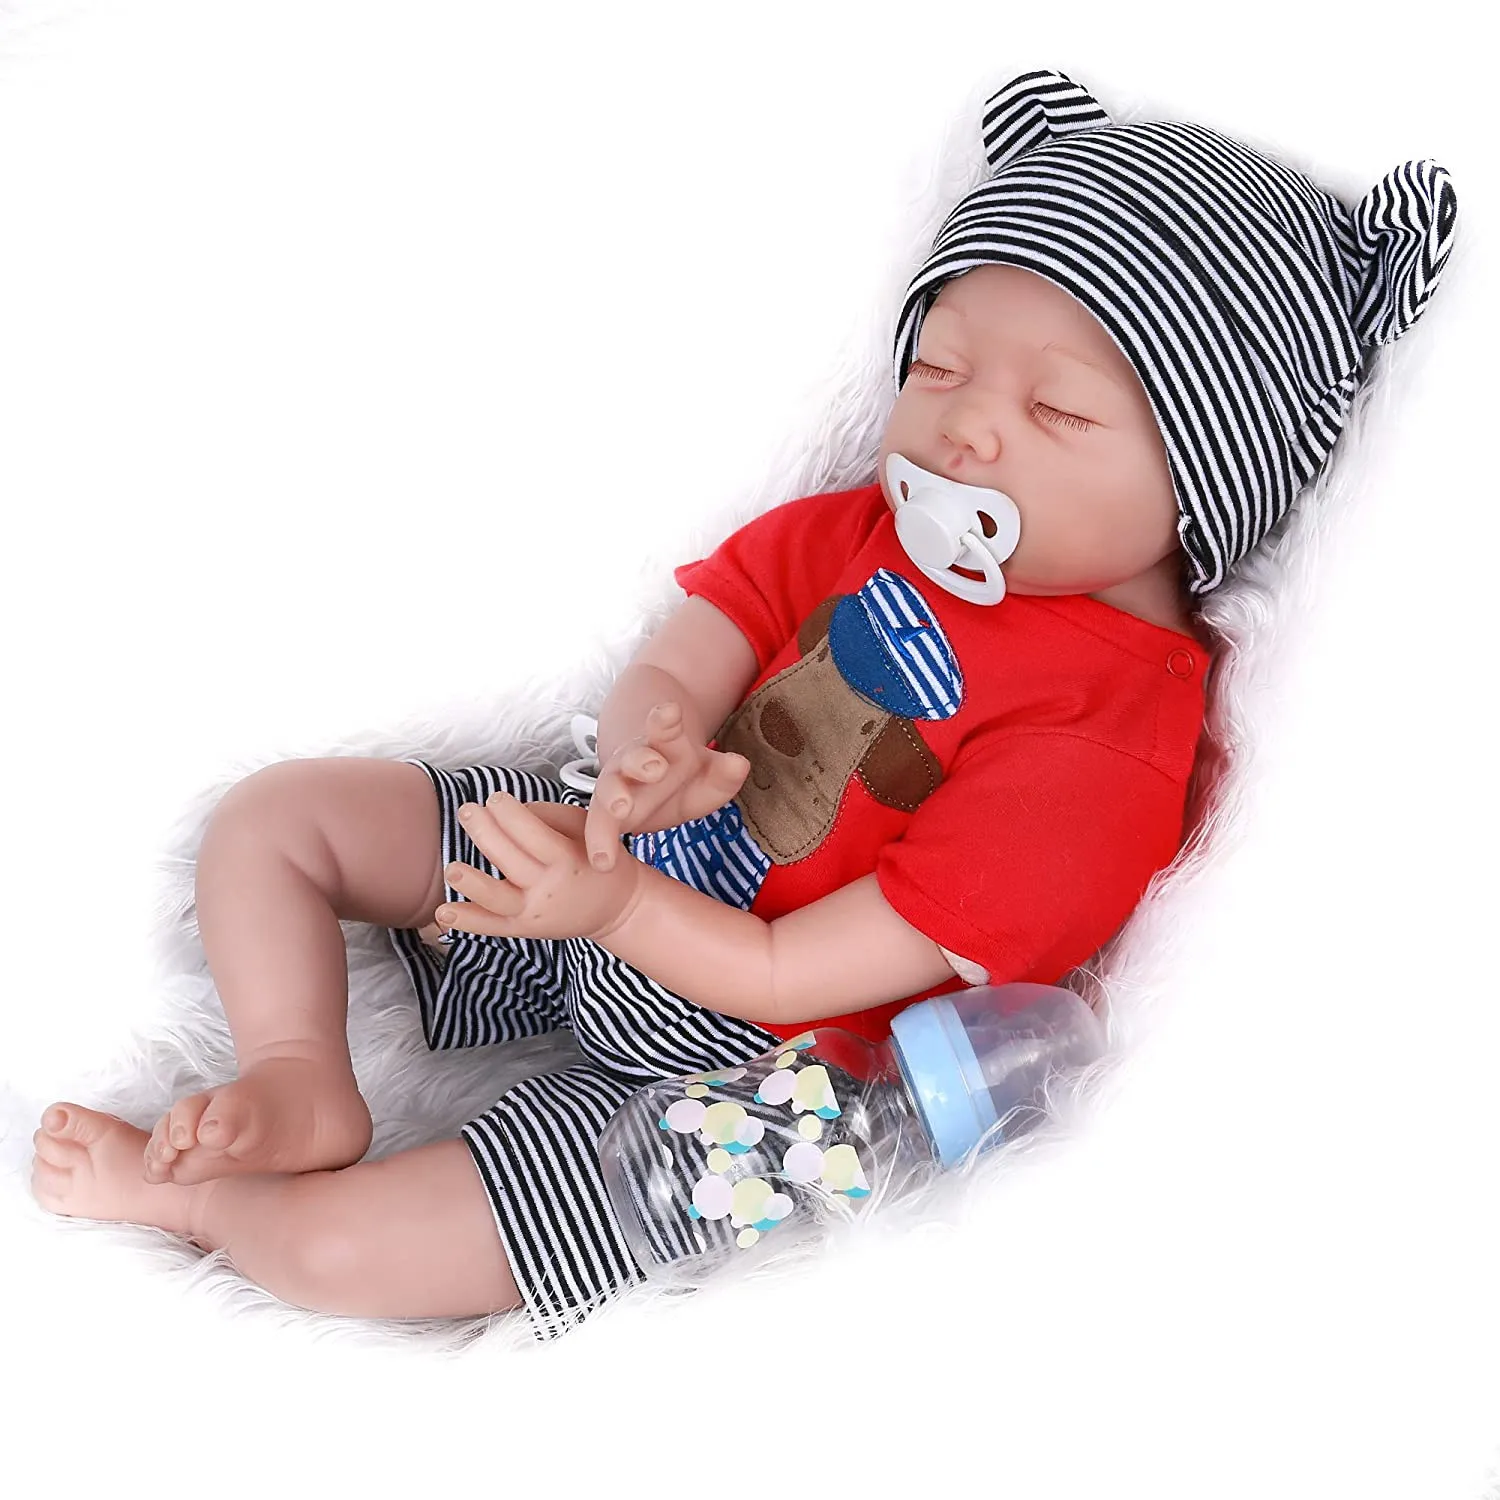 

Lifelike Silicone Vinyl Reborn Baby Doll 22inch/55cm Realistic Cute Sleeping Babies Dolls With Lovely Clothes Kids Playmate